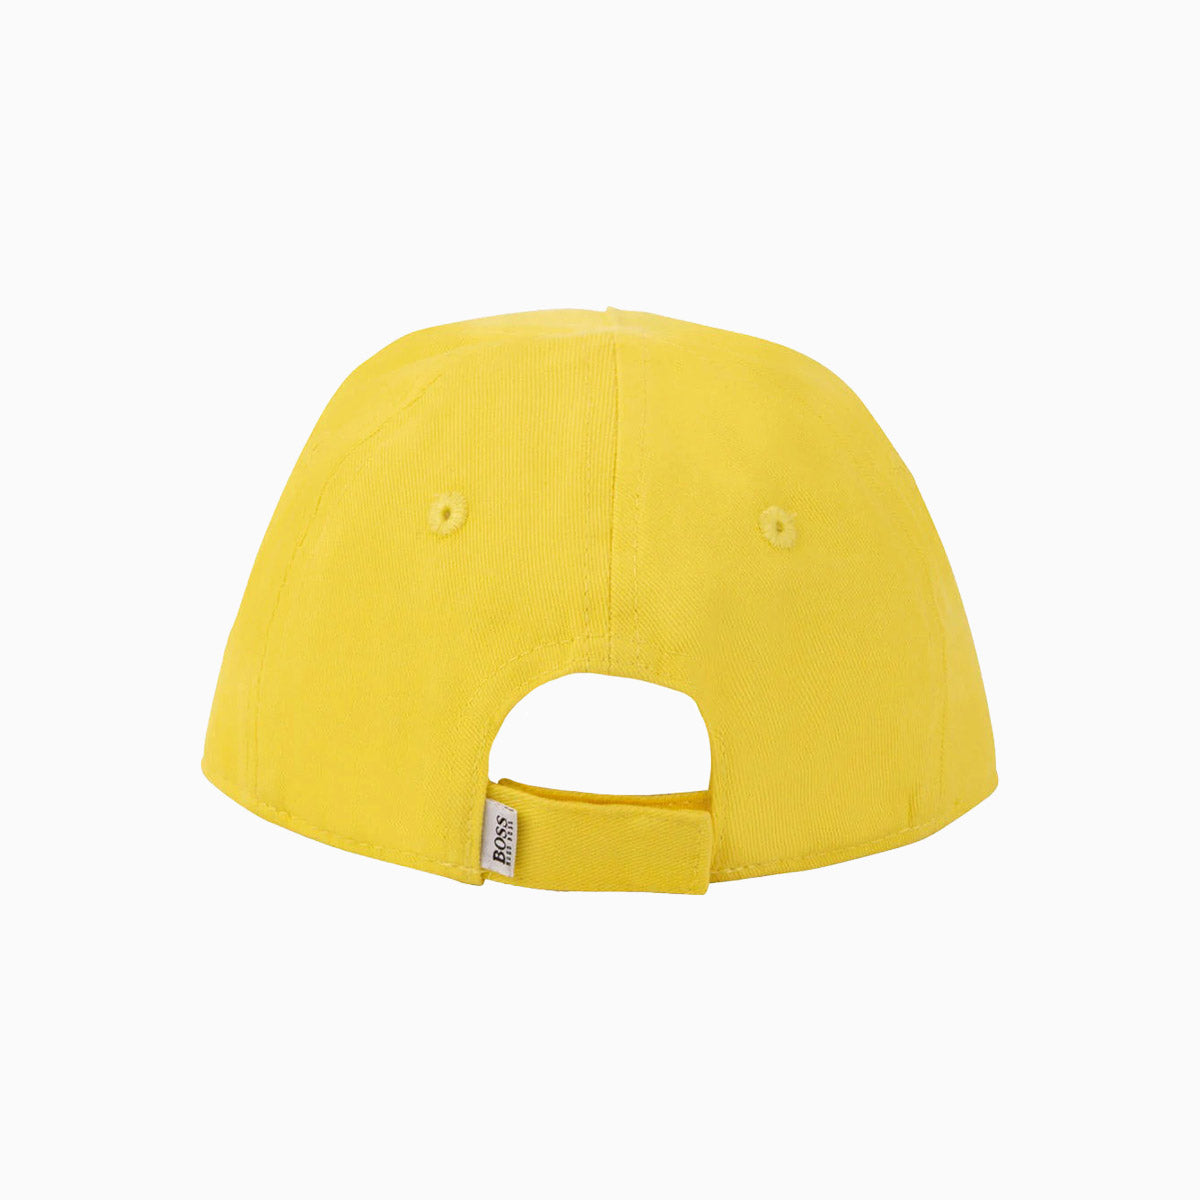 Hugo Boss Kid's Cotton Twill Cap Infants - Color: Yellow, Navy, Electric Blue, Bright Red - Kids Premium Clothing -